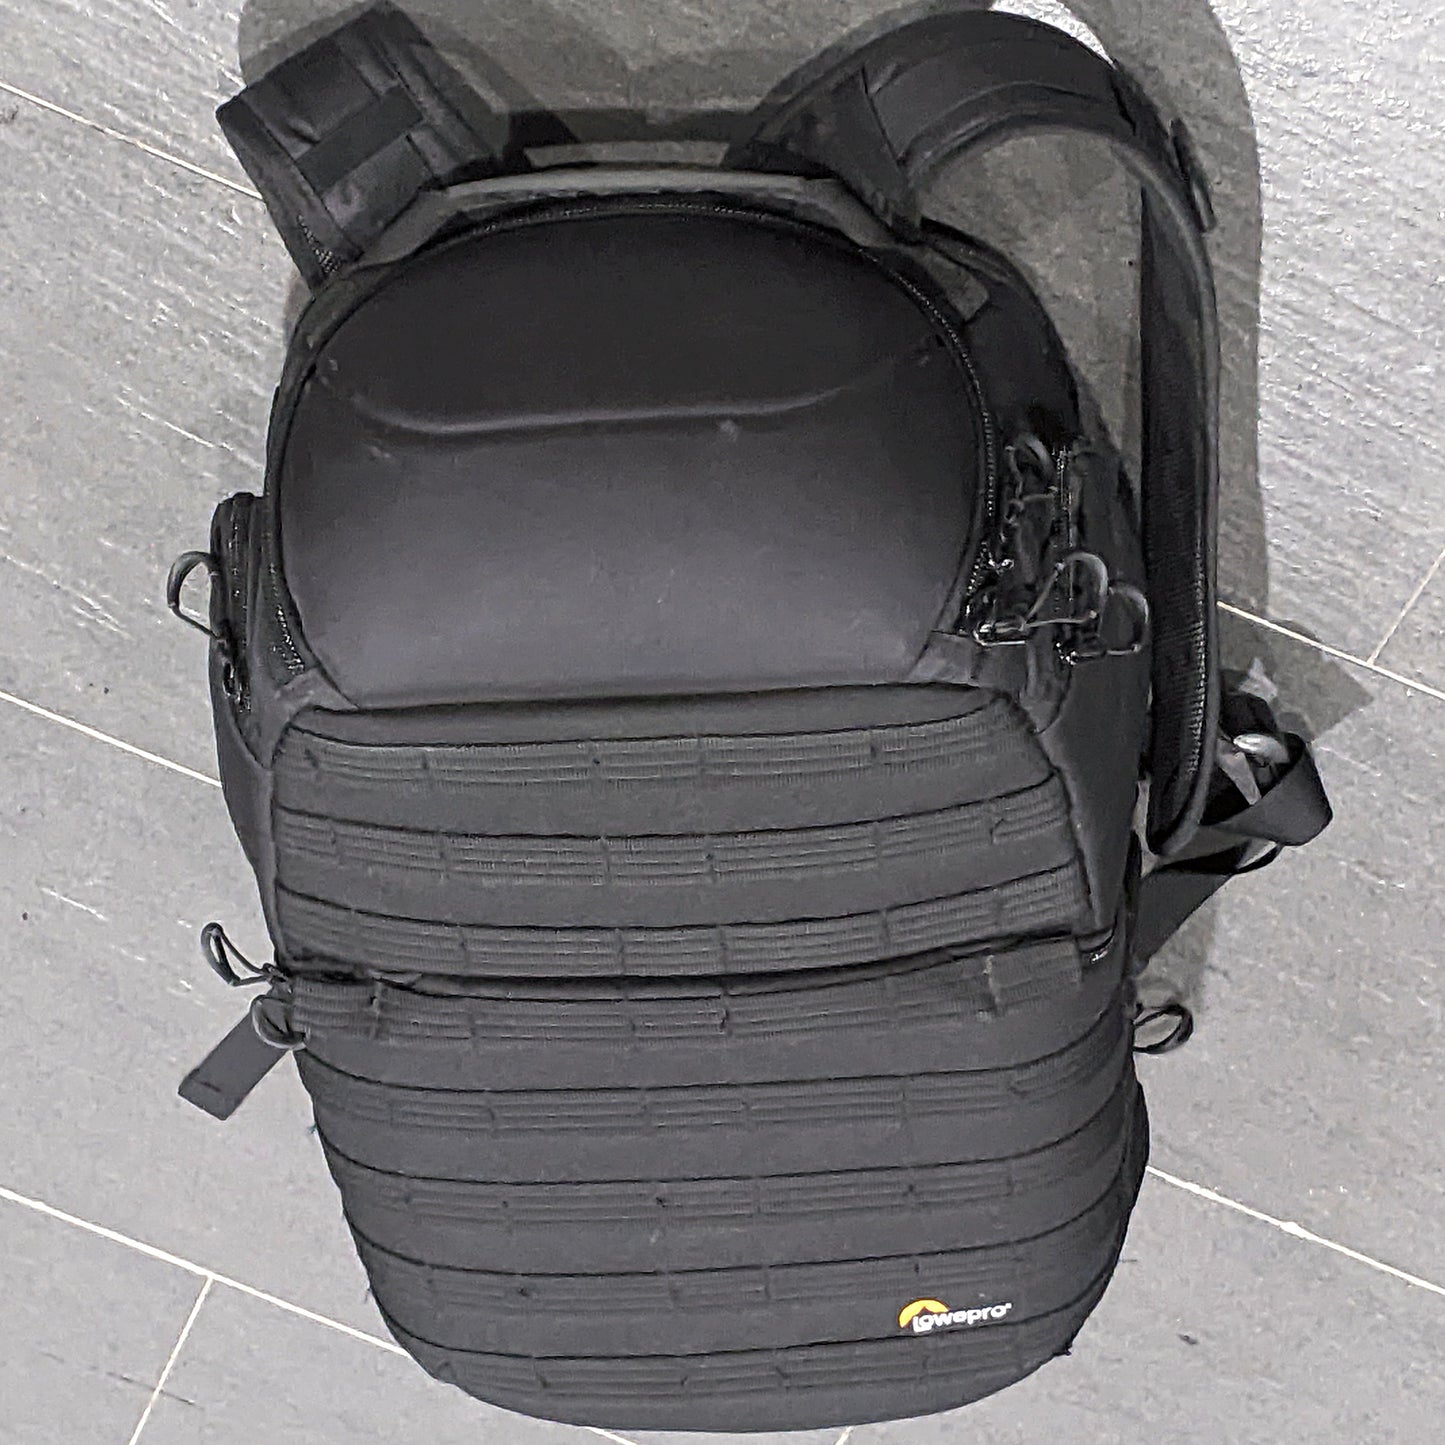 Lowepro ProTactic 450 AW Camera Backpack